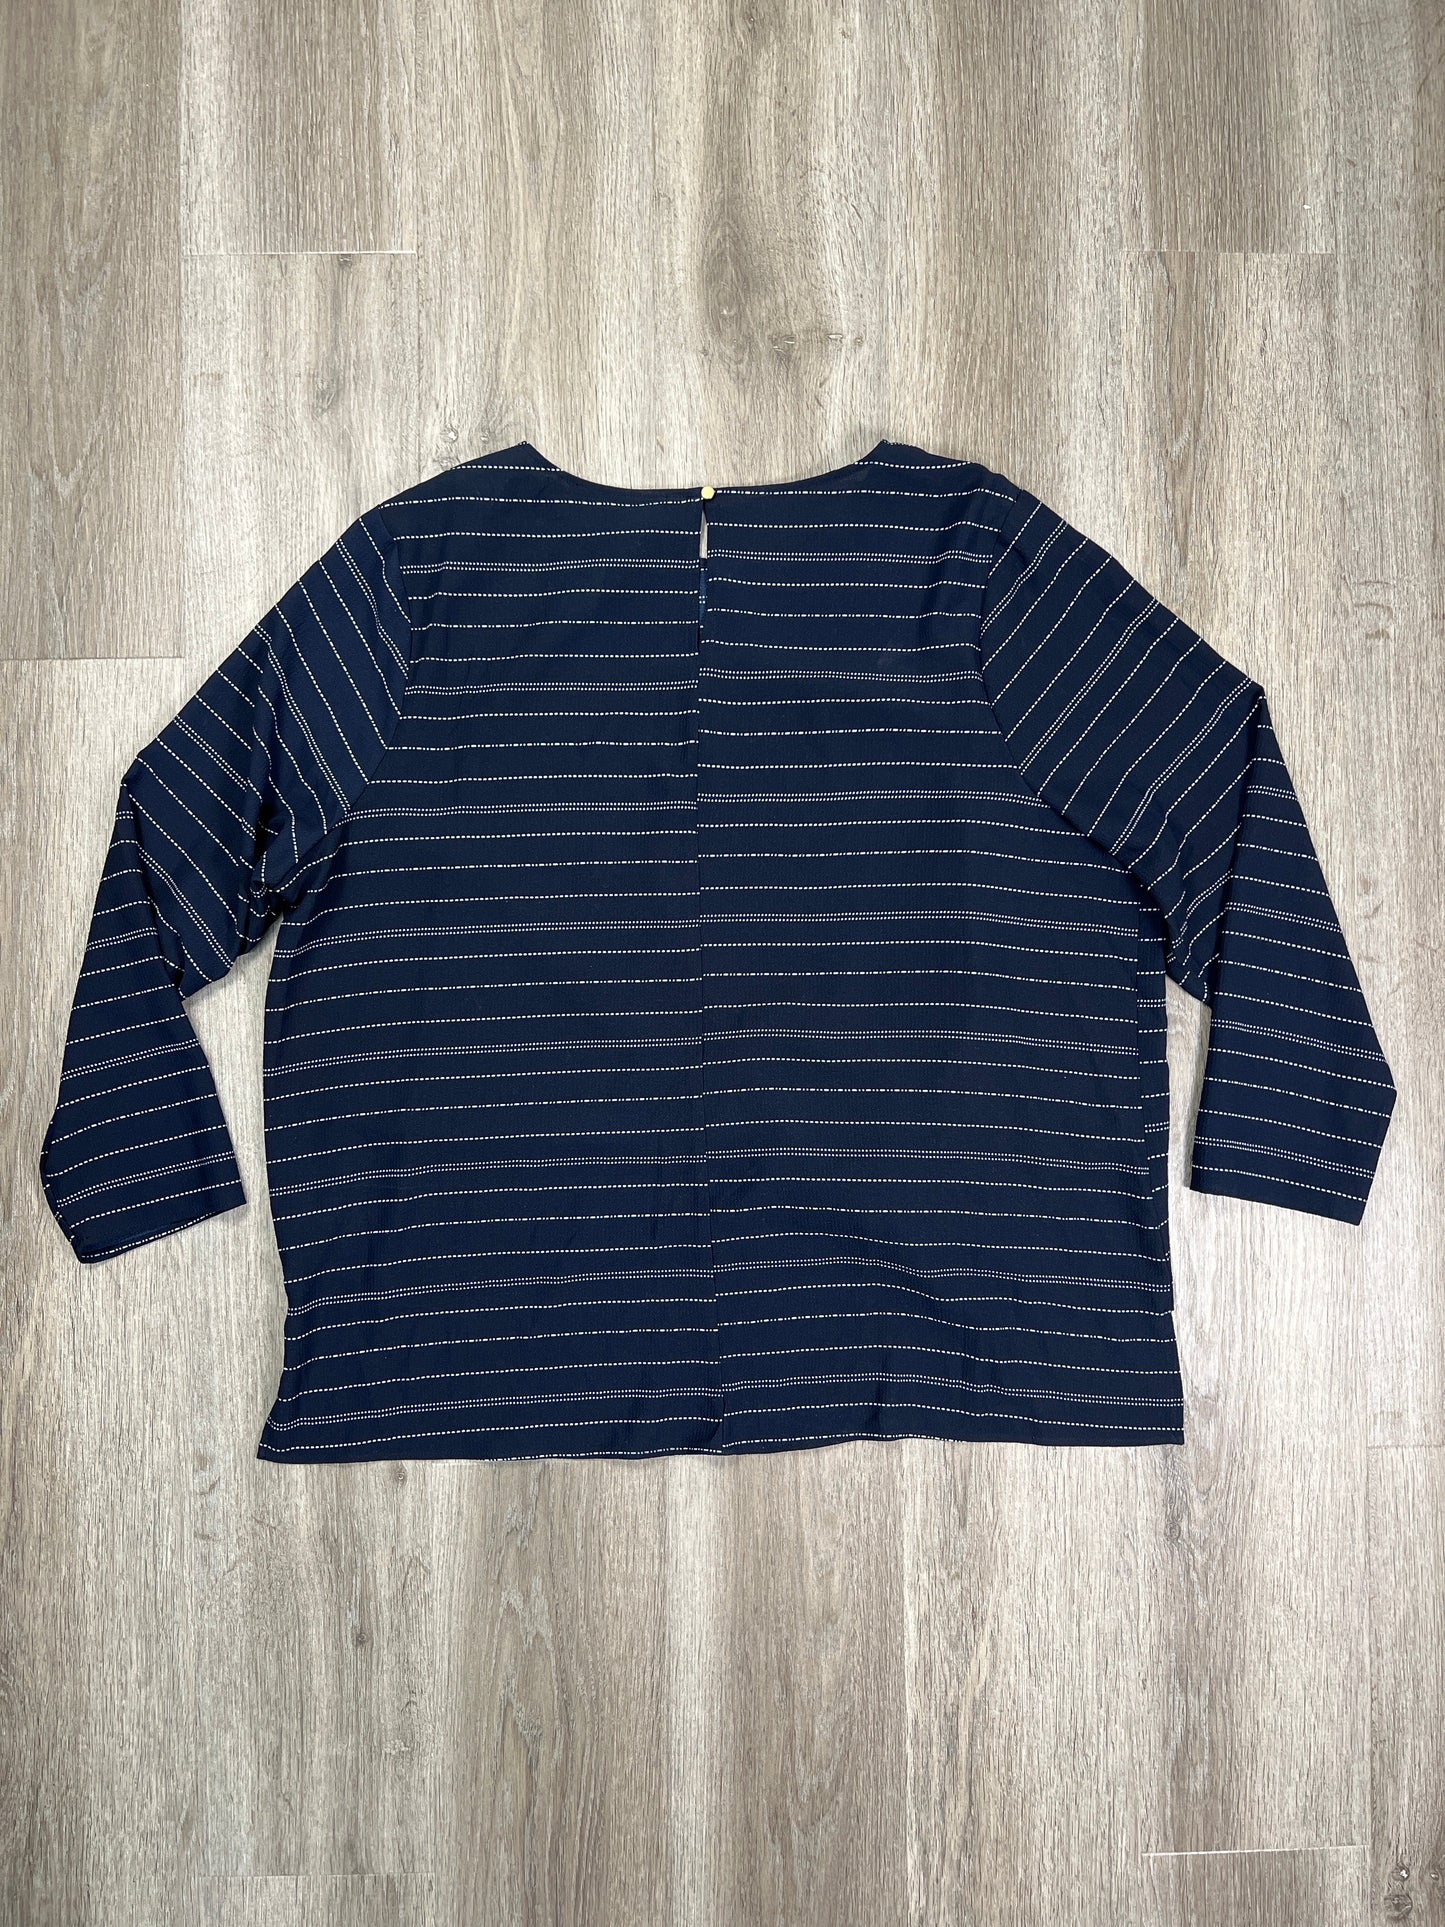 Top Long Sleeve By Ava & Viv  Size: 3x